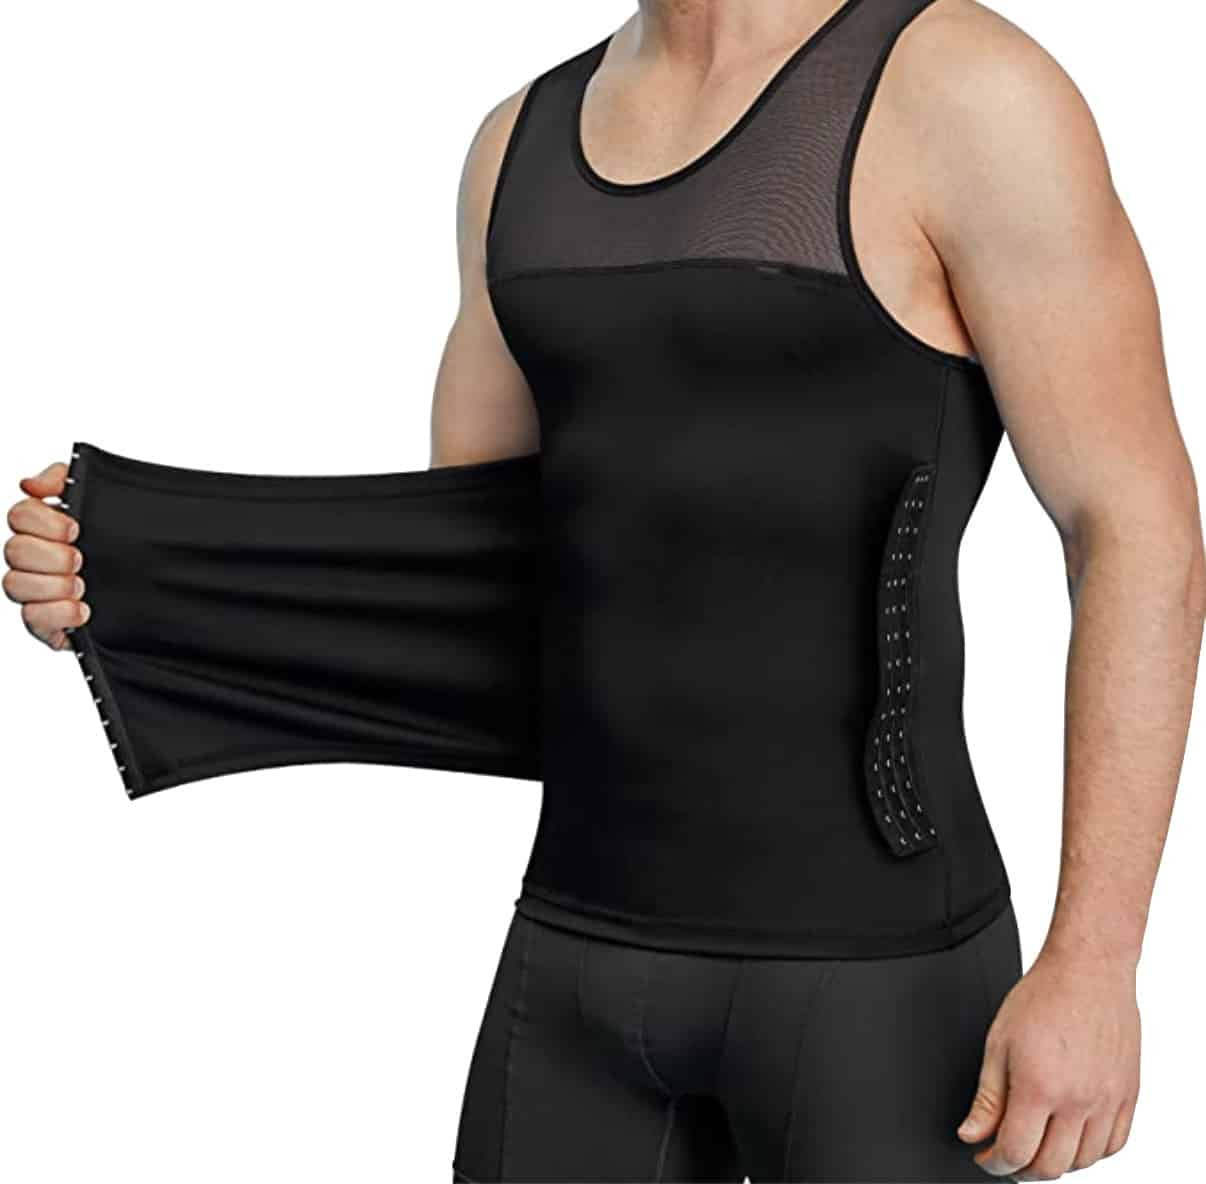 model wearing a compression girdle